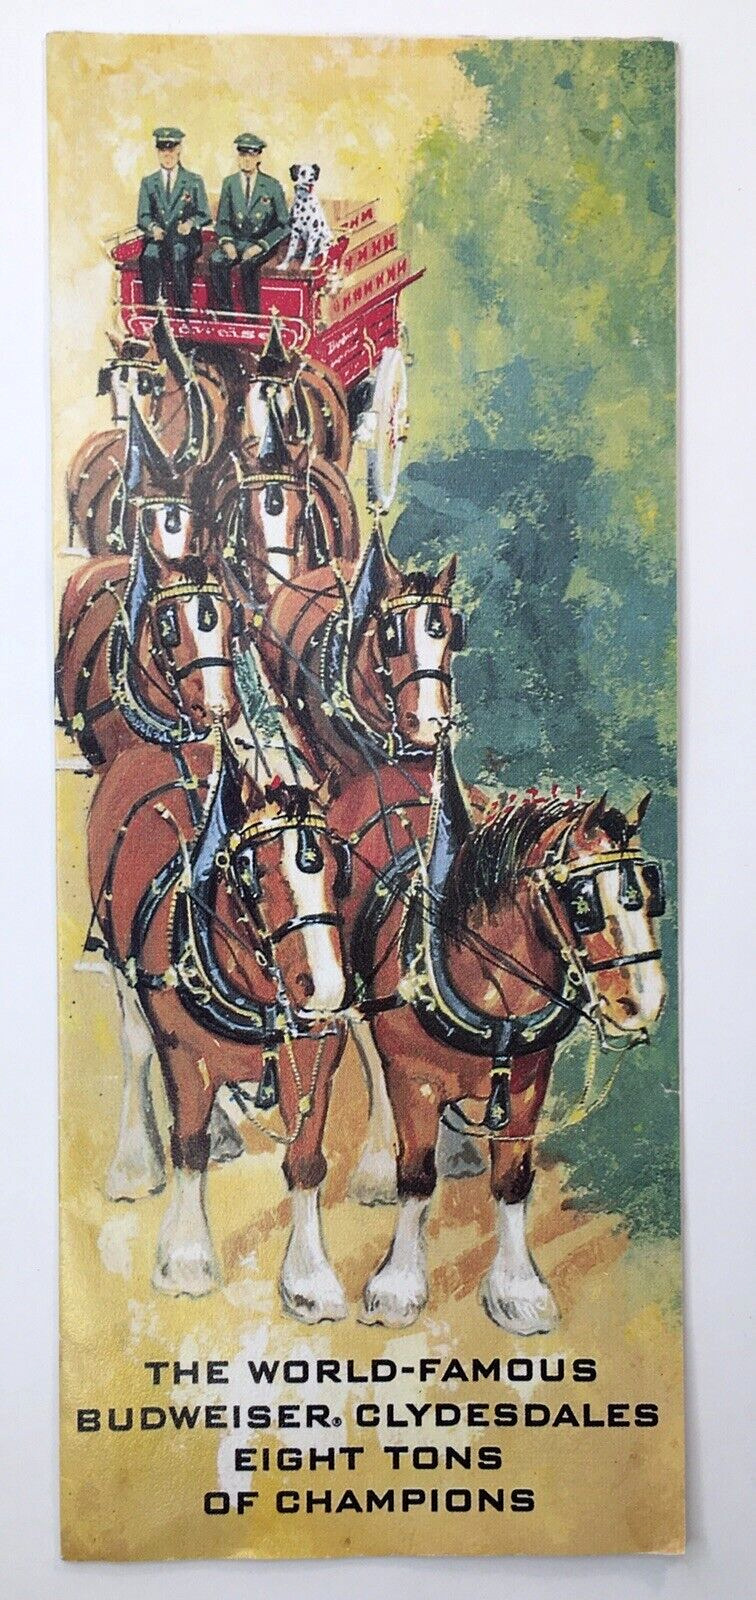 Budweiser Clydesdale Horses St. Louis MO Vintage 1970s Brochure Info History Ad